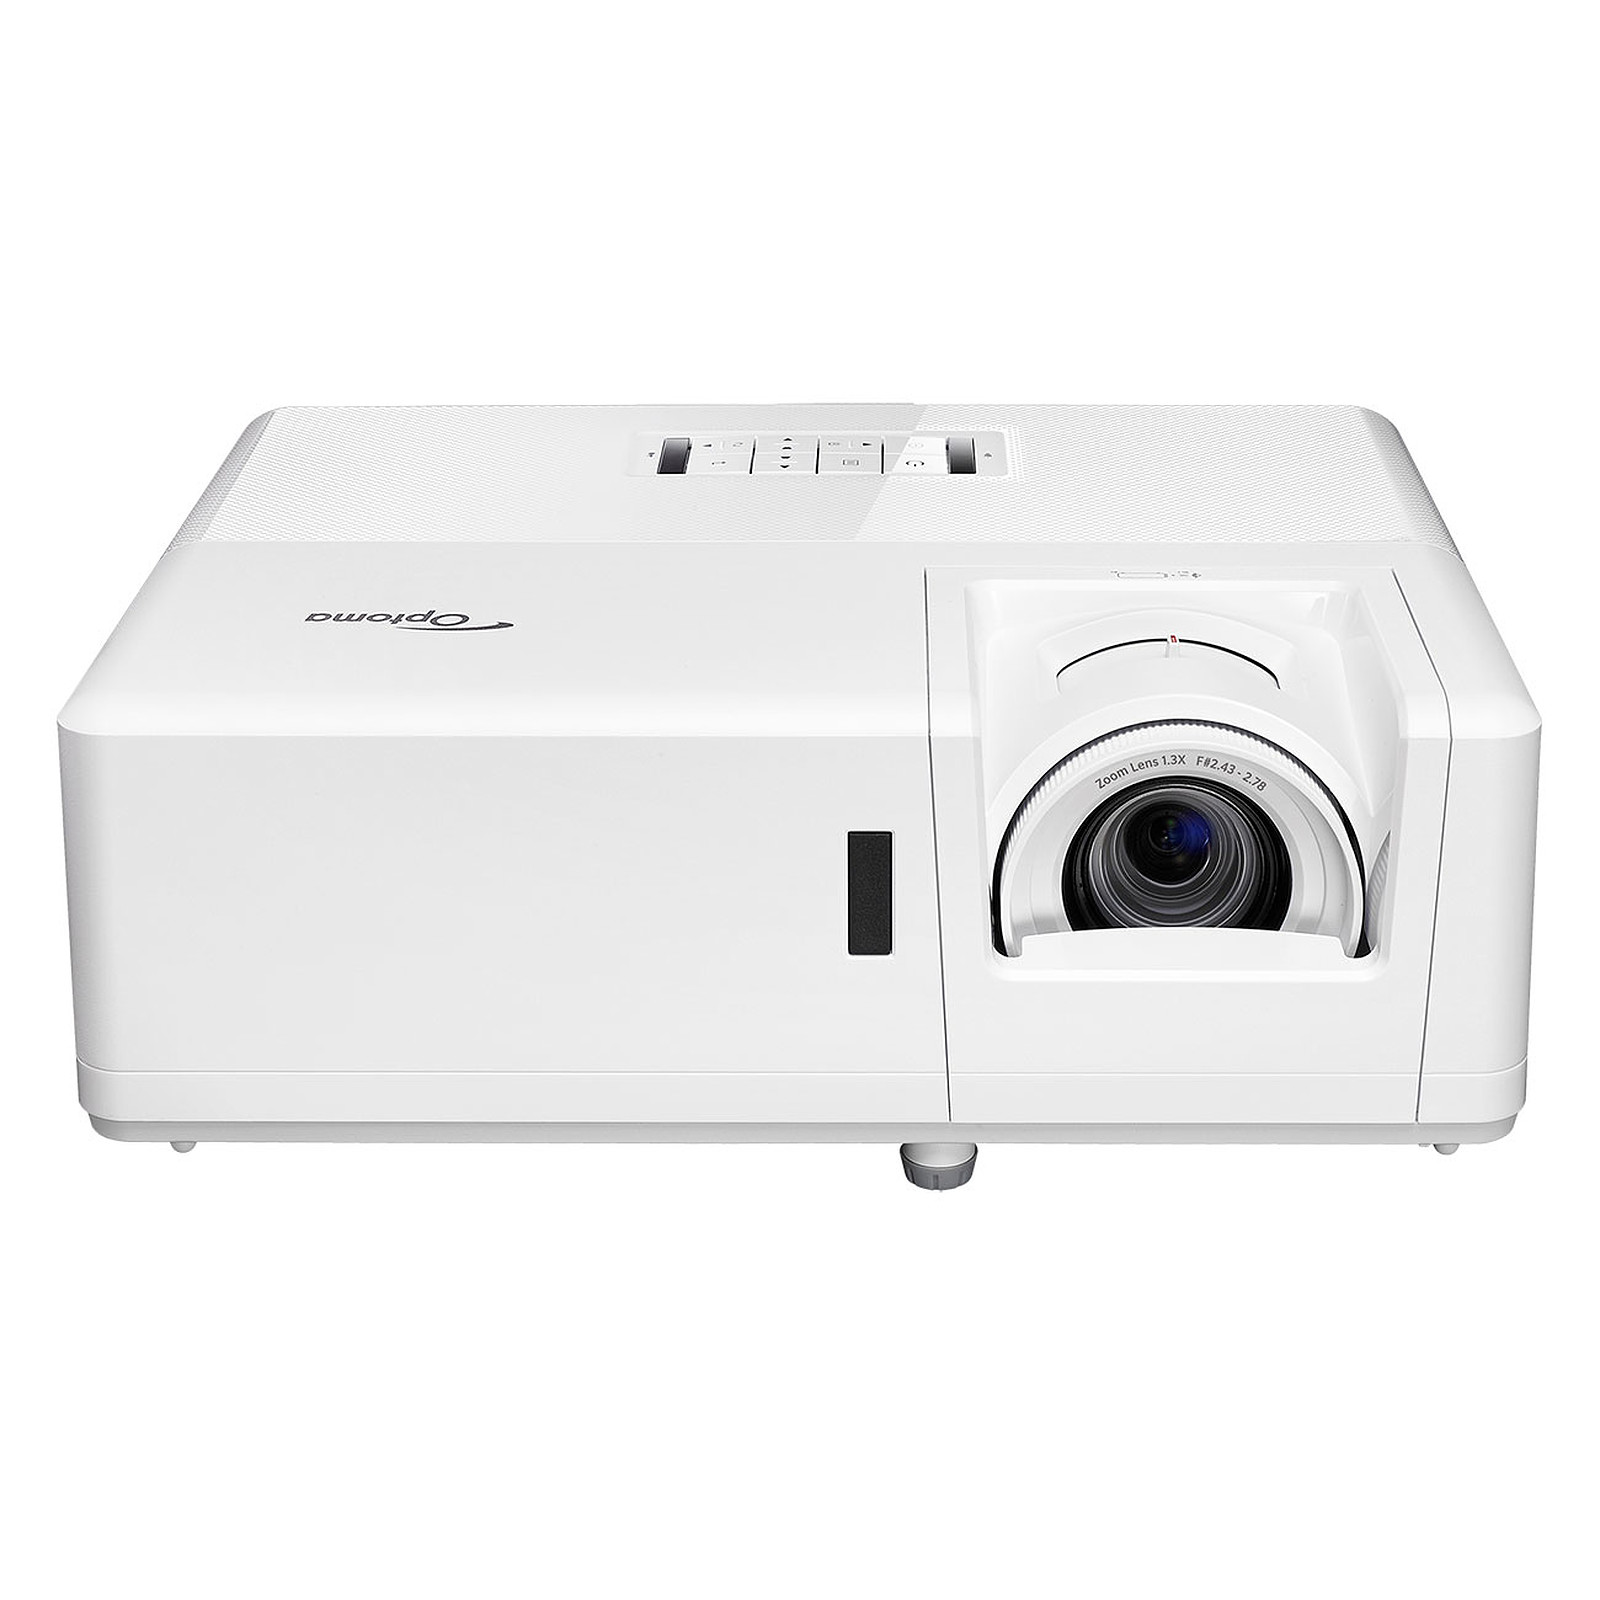 Optoma ZW350 - Videoprojecteur Optoma